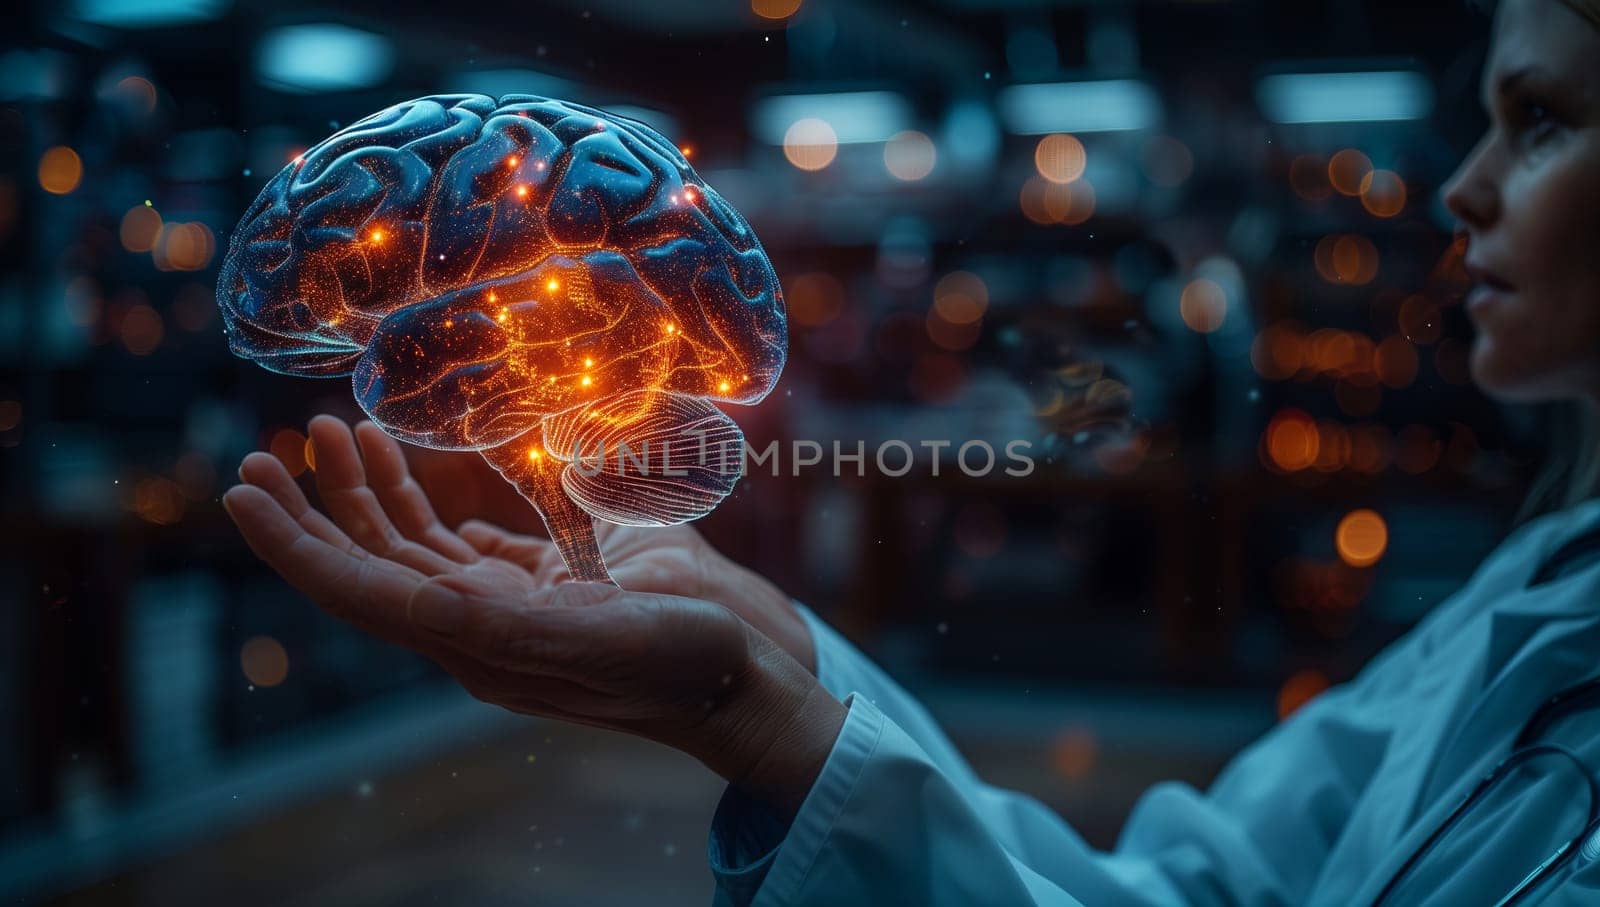 A woman holds a vibrant electric blue brain, symbolizing the connection between science and art, in an intriguing event merging knowledge and entertainment